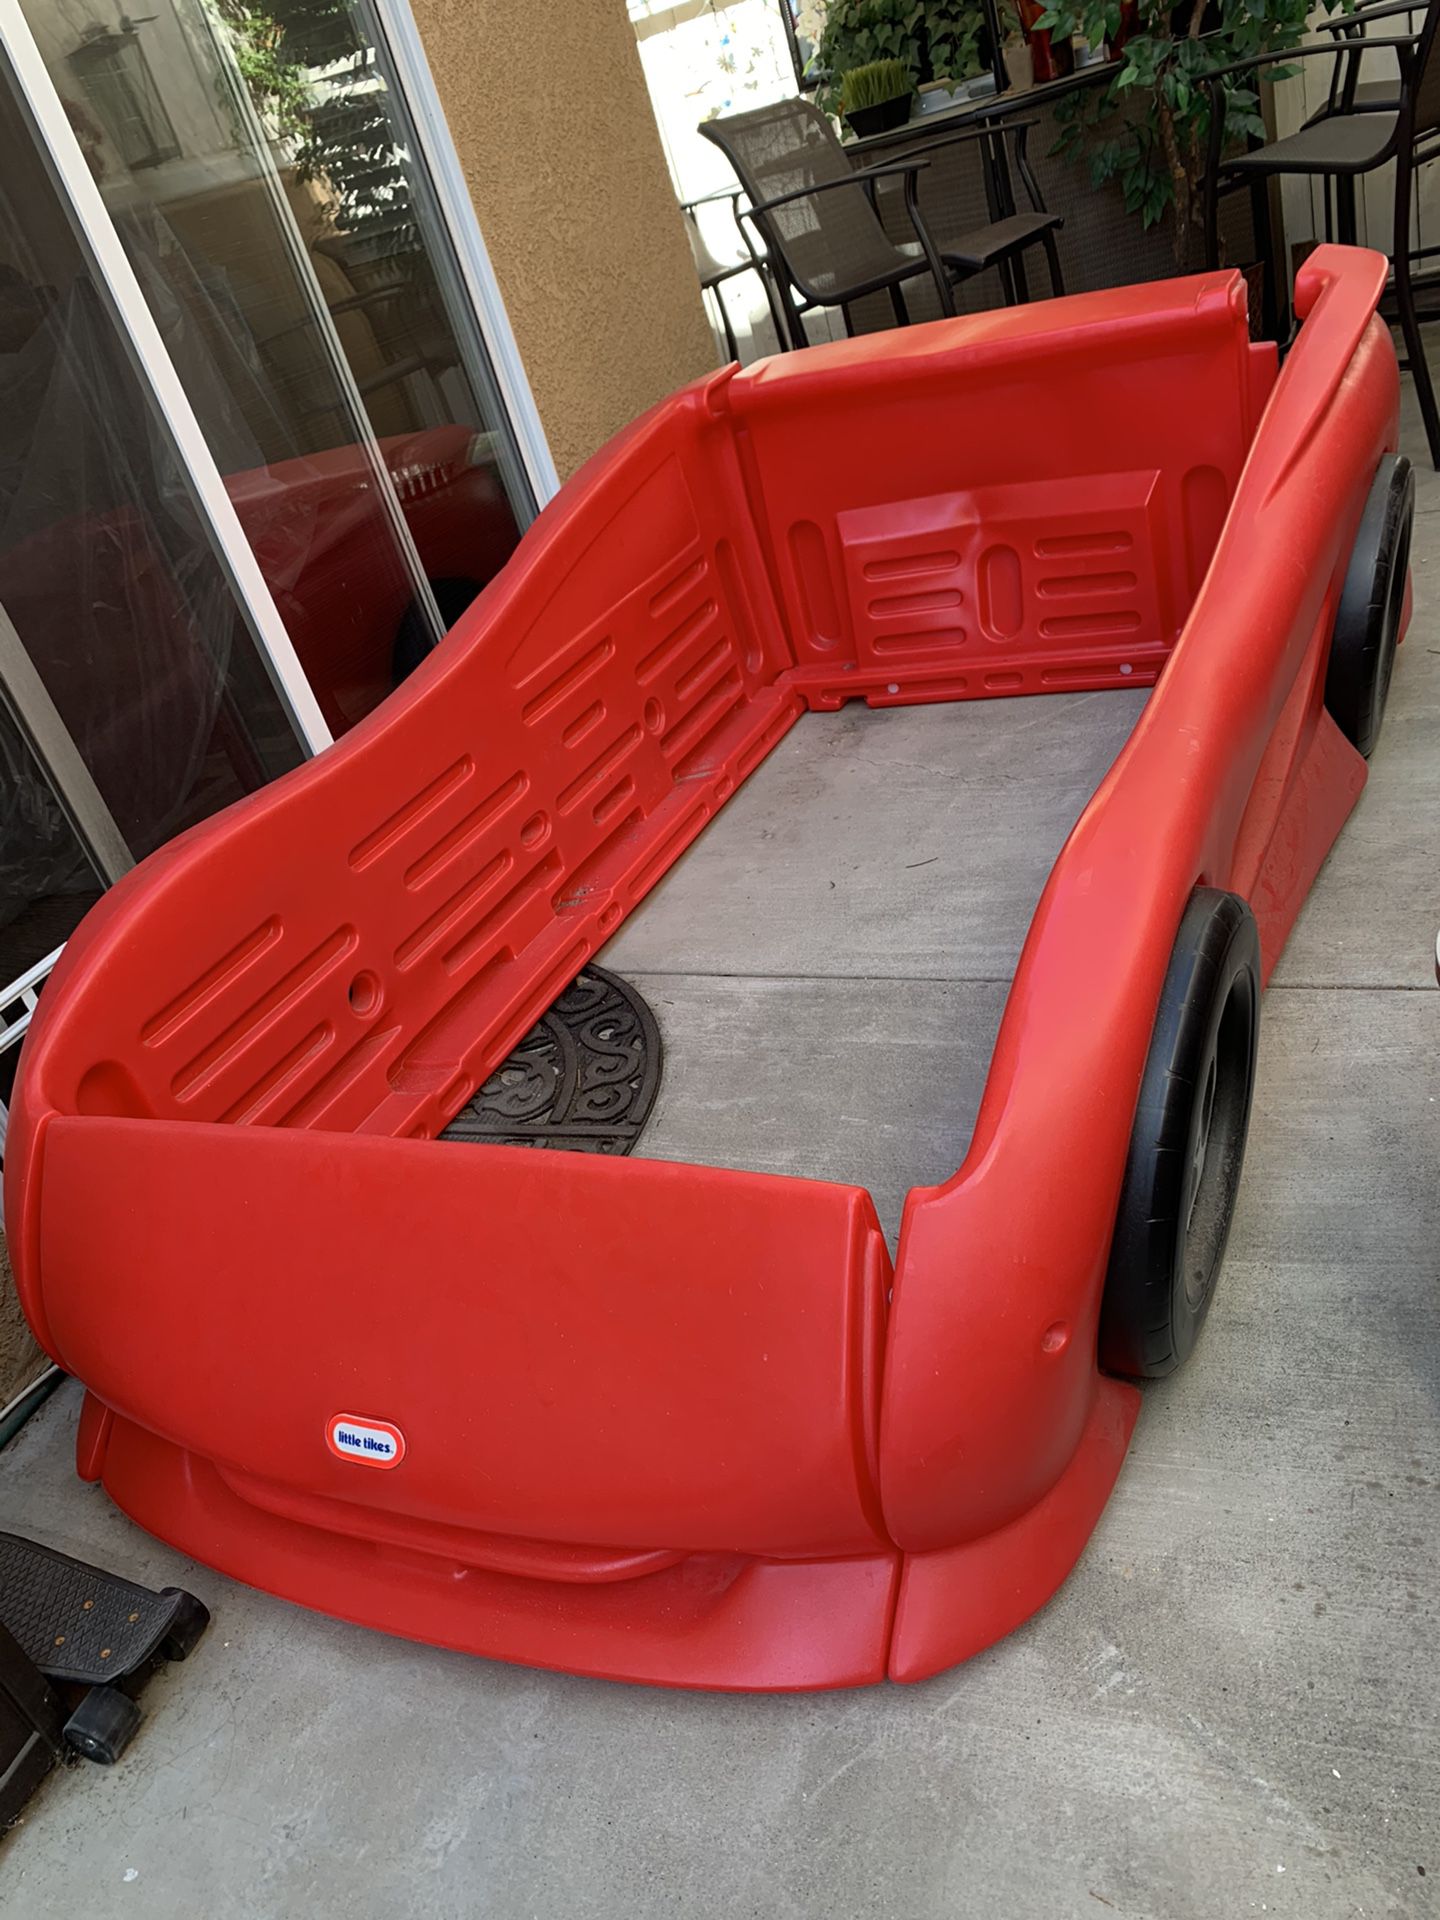 CARS TWIN BED ONLY!!!for $30with free mattress and box spring